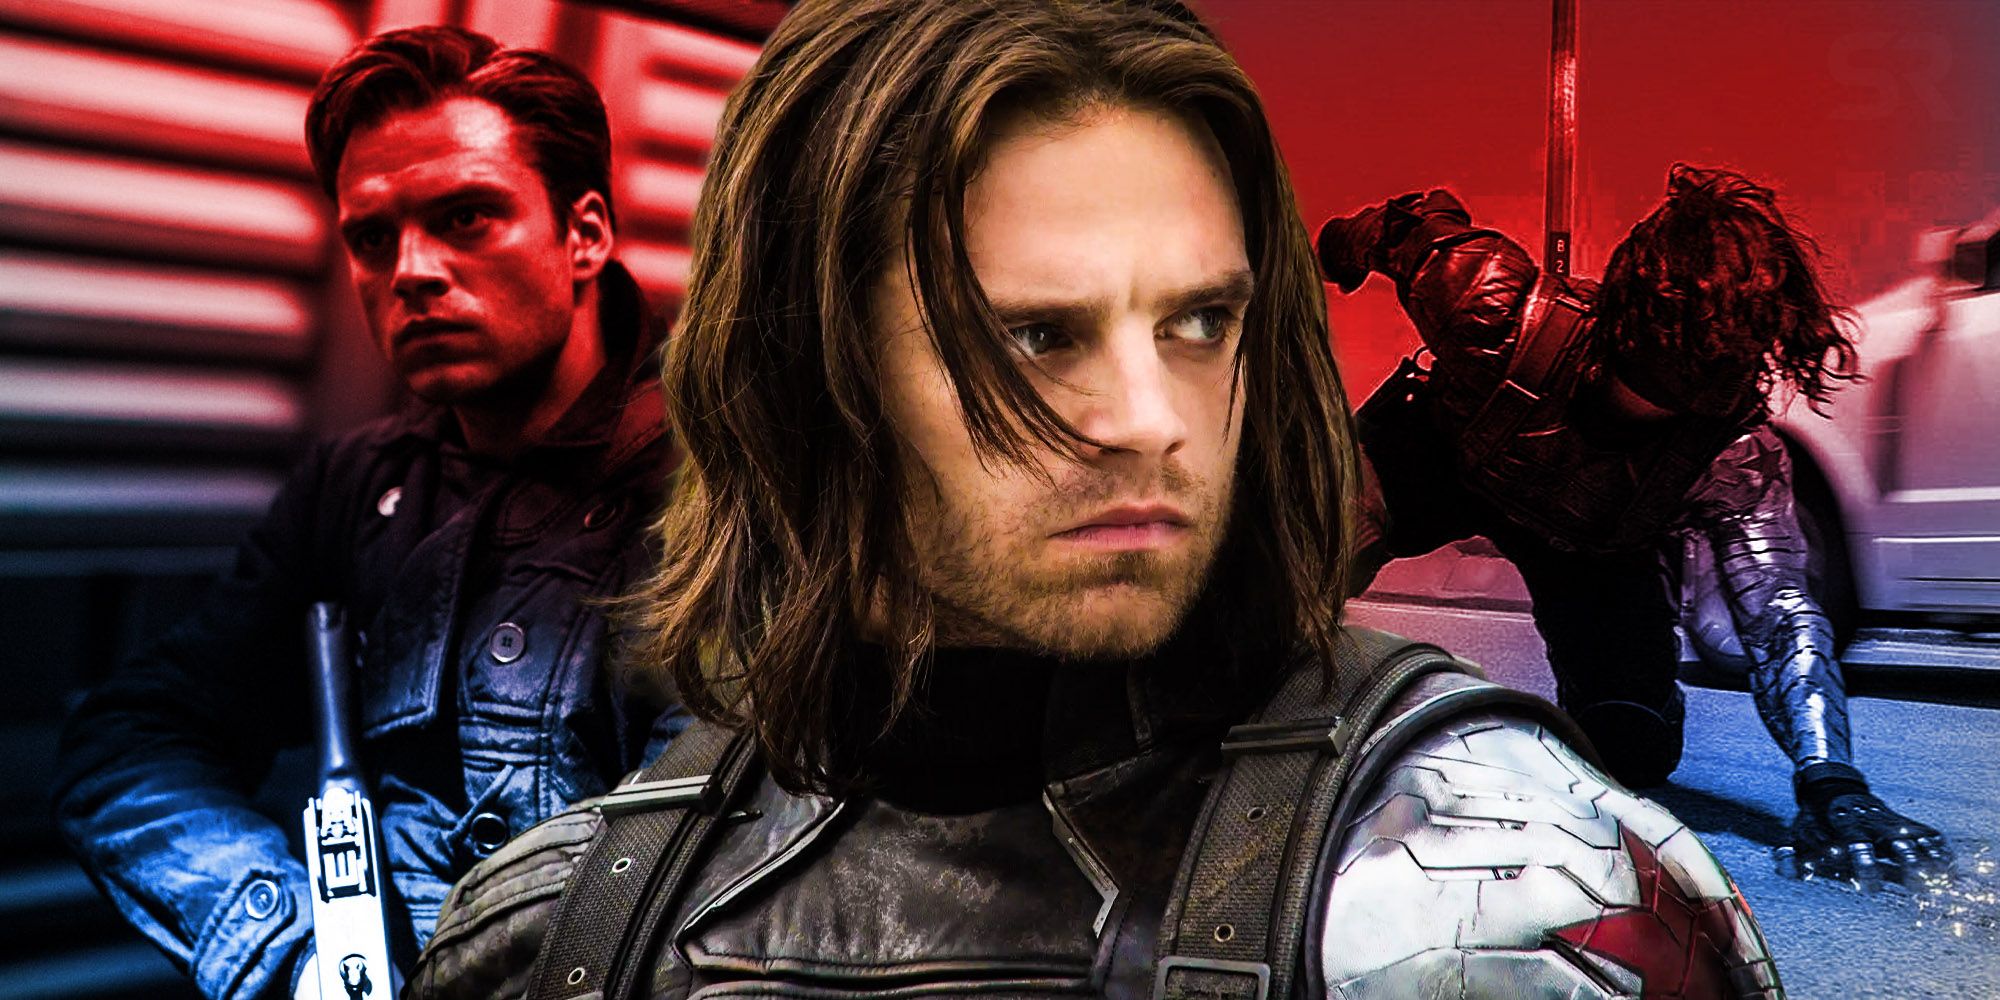 Winter soldier powers Captain america the first avenger the winter soldier